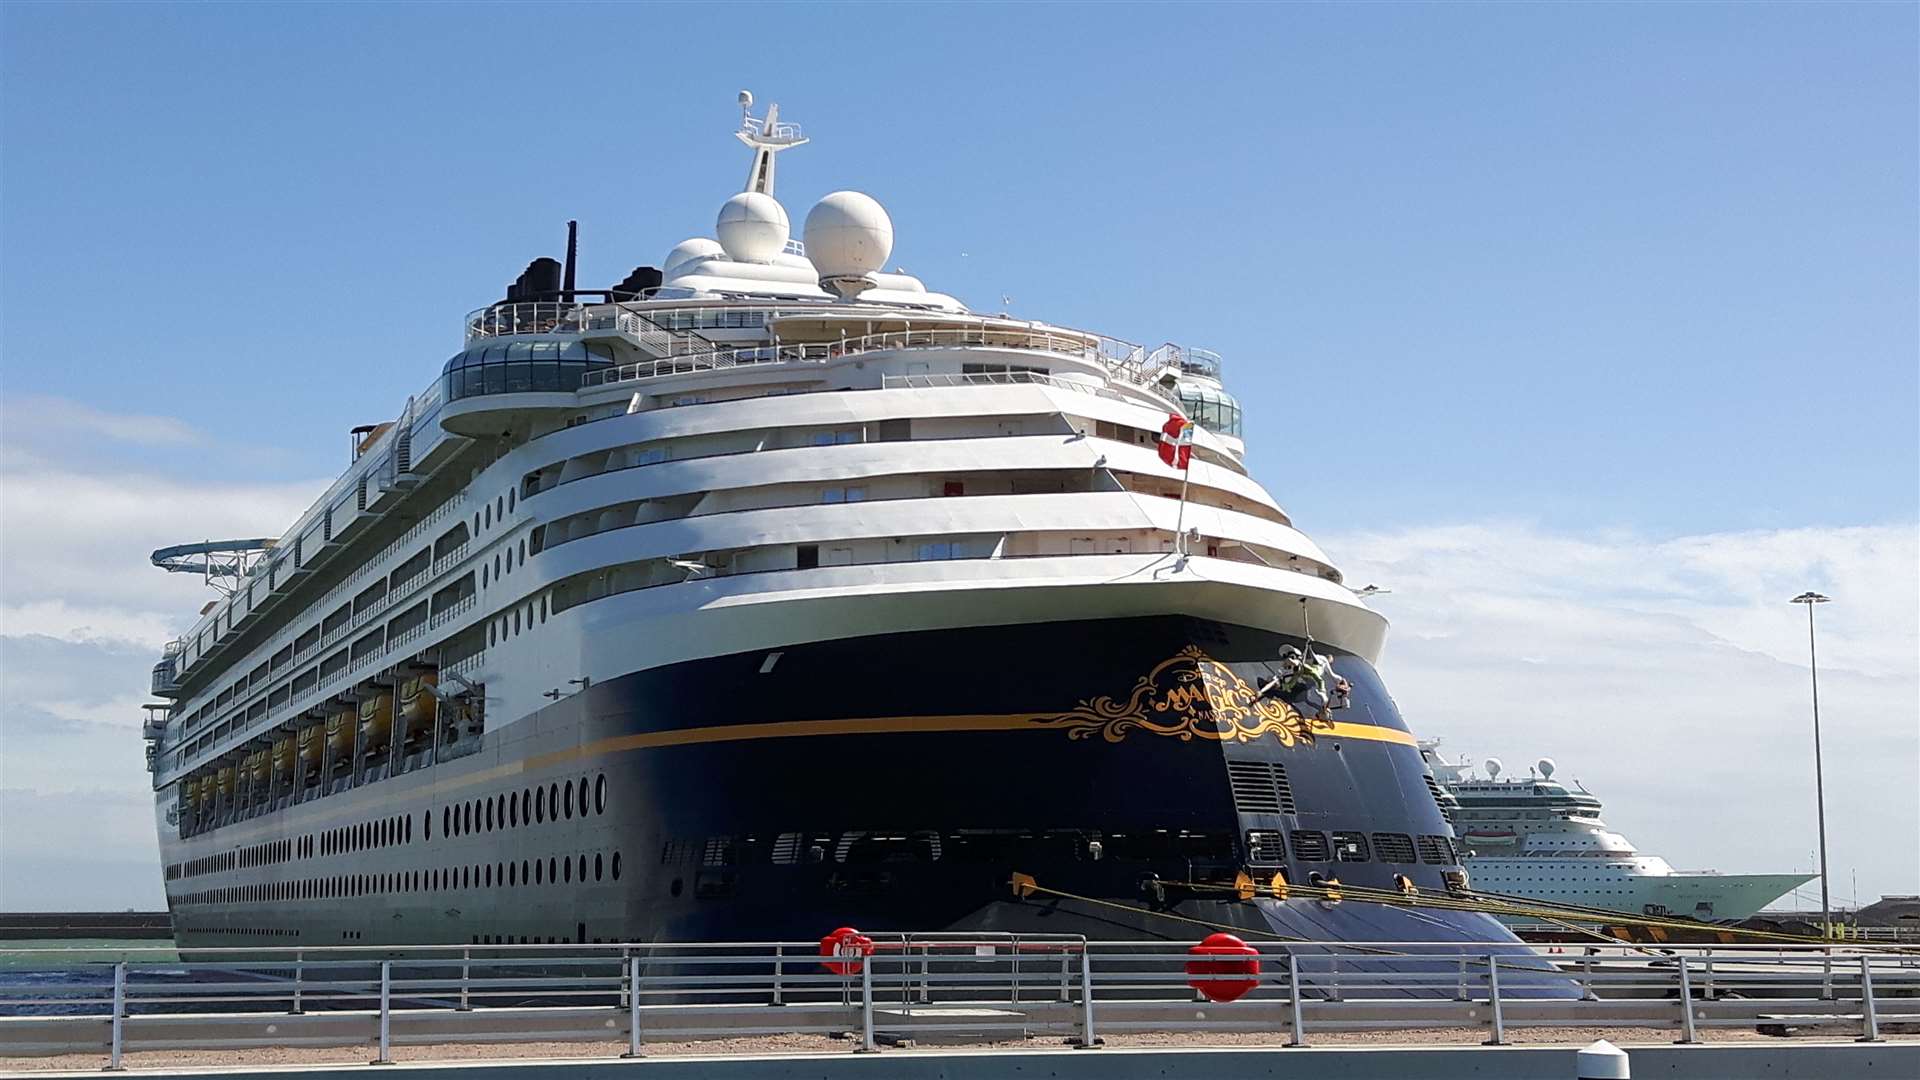 Disney Magic, as viewed from Marina Pier in Dover